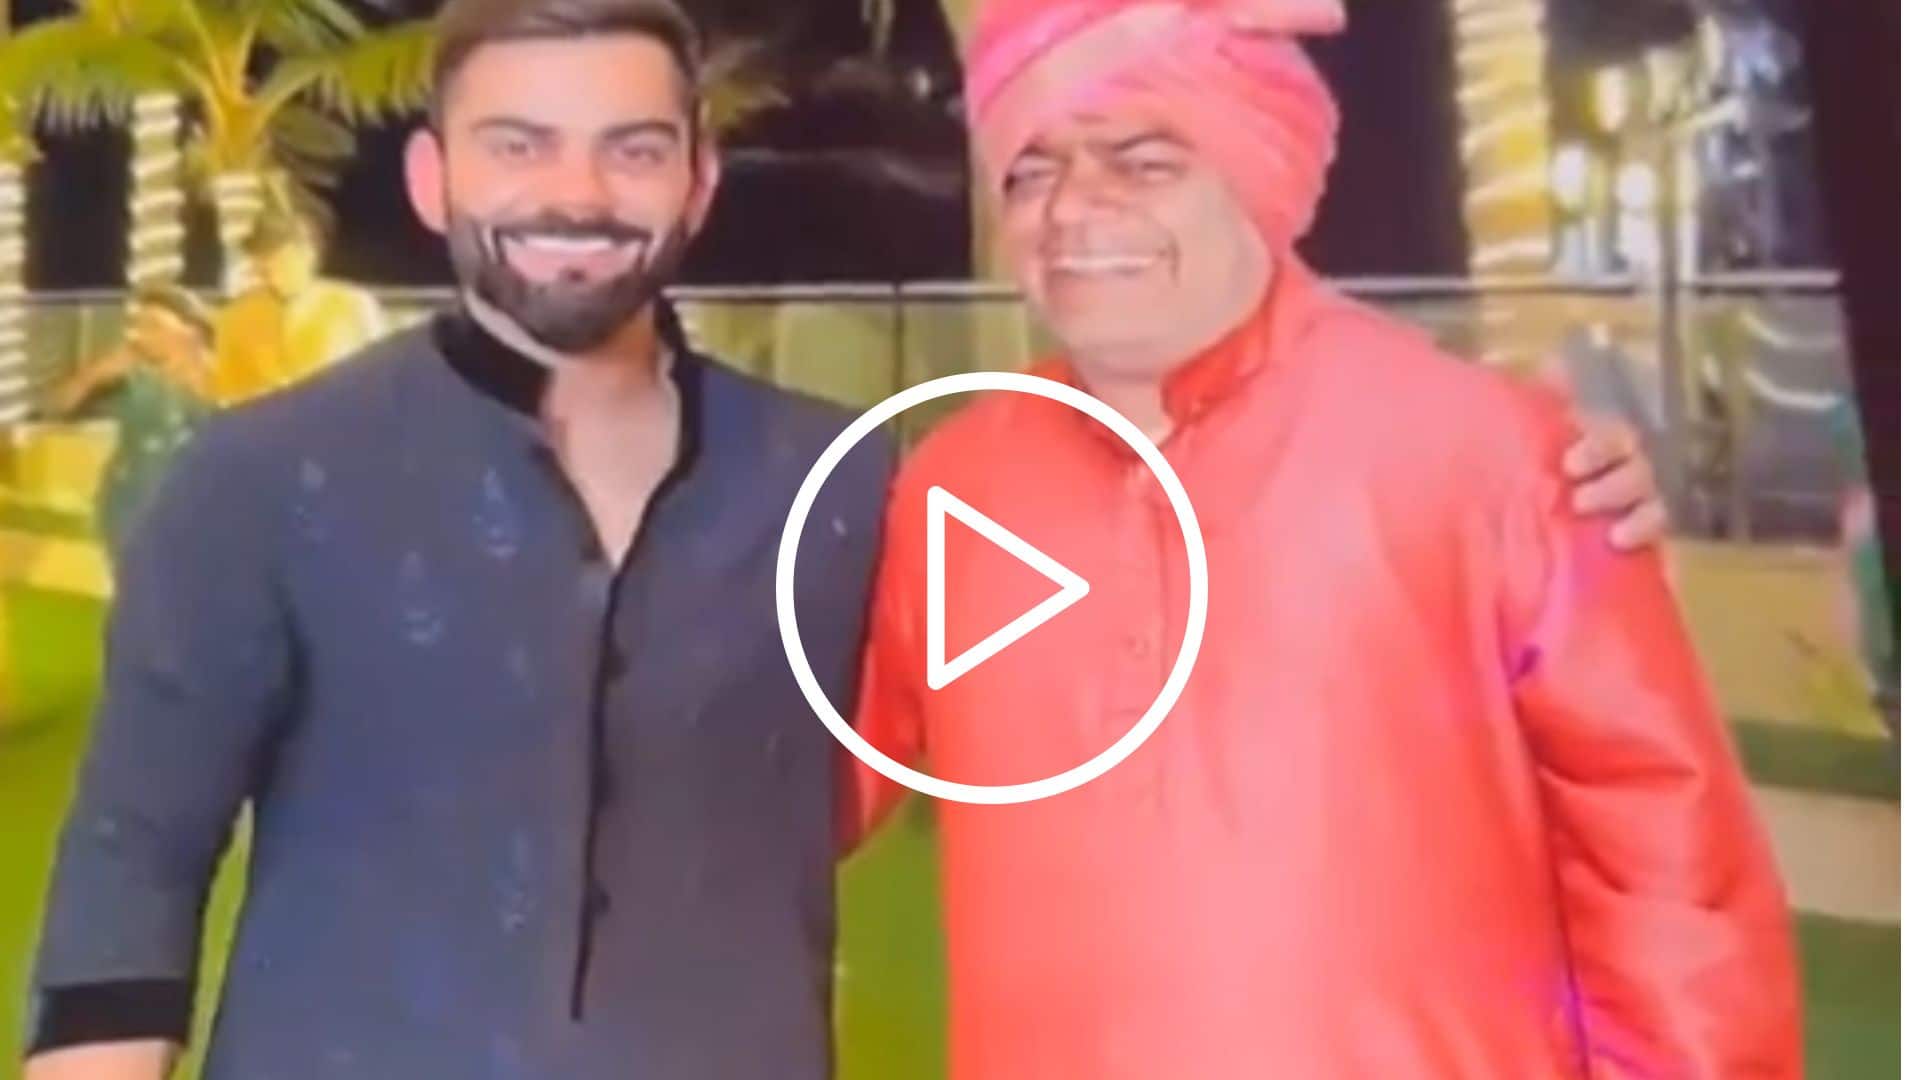 [Watch] Video of Virat Kohli's Fan Adding Late Father to Artwork Takes Internet by Storm